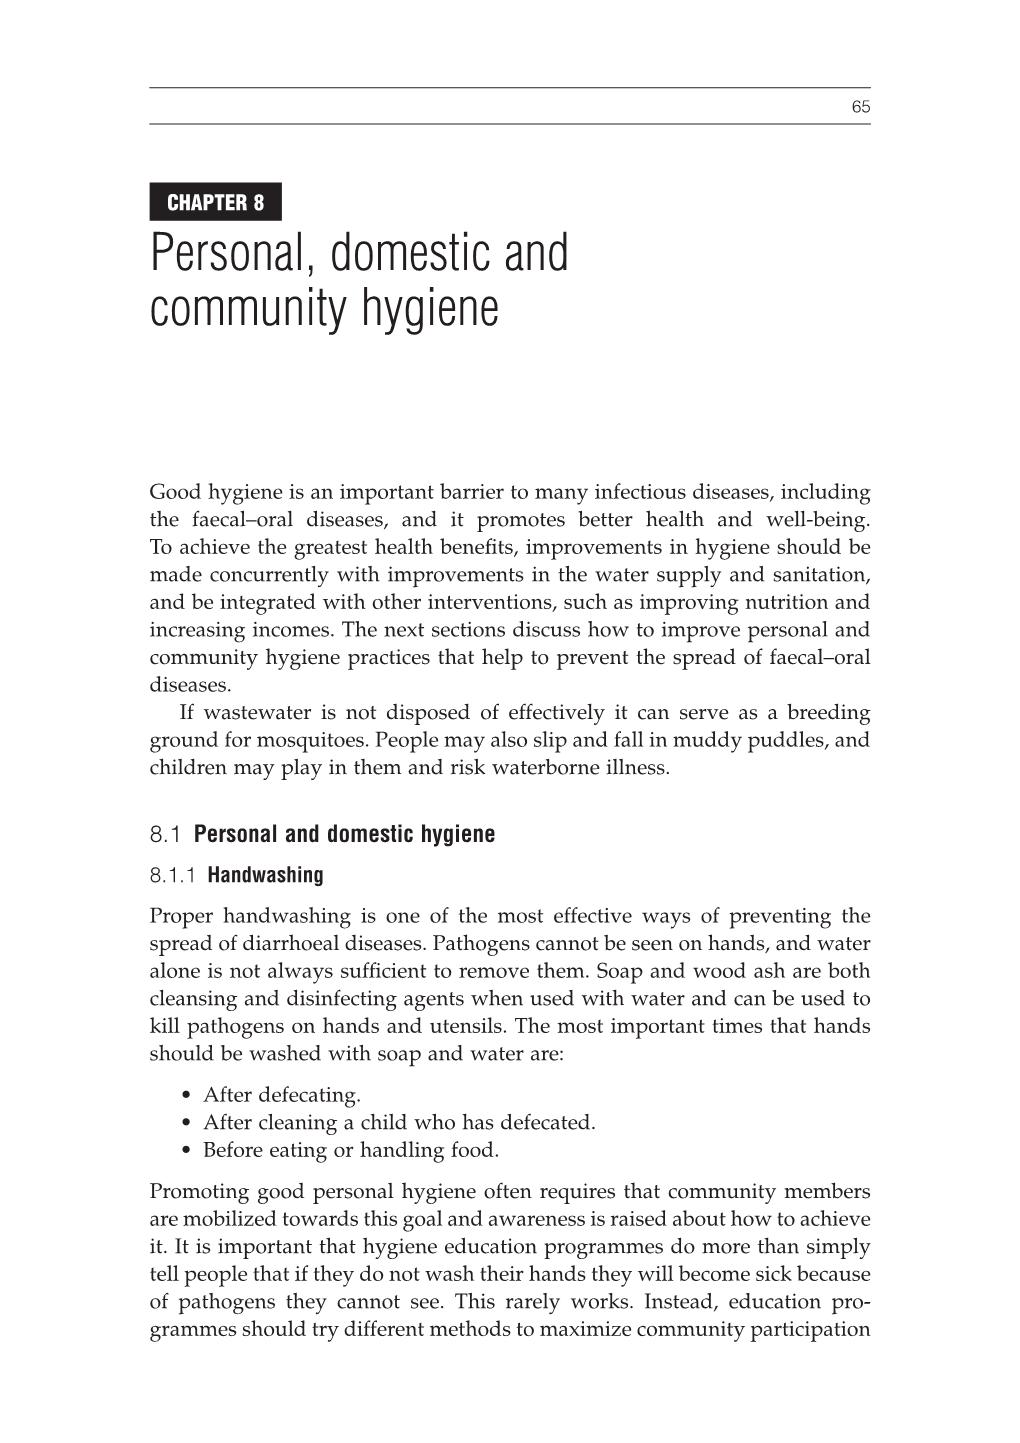 Personal, Domestic and Community Hygiene